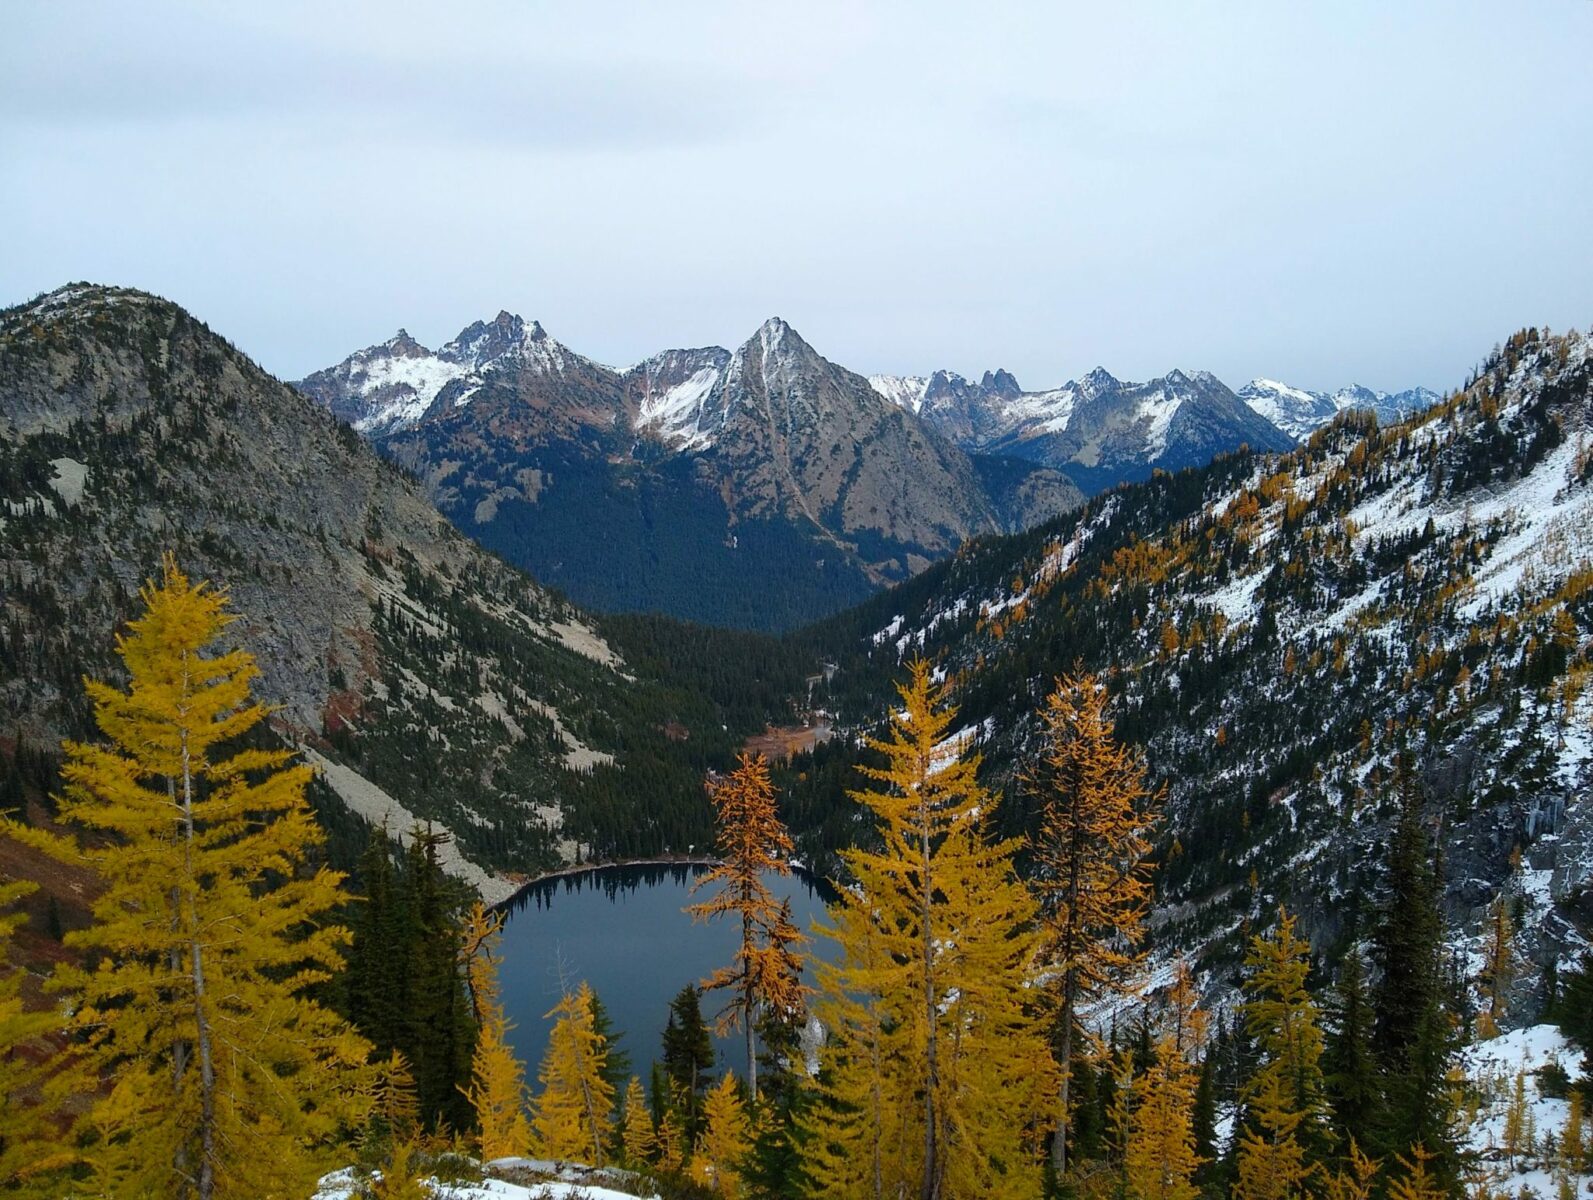 Golden larch trees in the foreground frame an alpine lake below. The lake is surrounded by high mountains with a dusting of snow. It's an overcast day along the Maple Pass trail, one of the best larch hikes in Washington